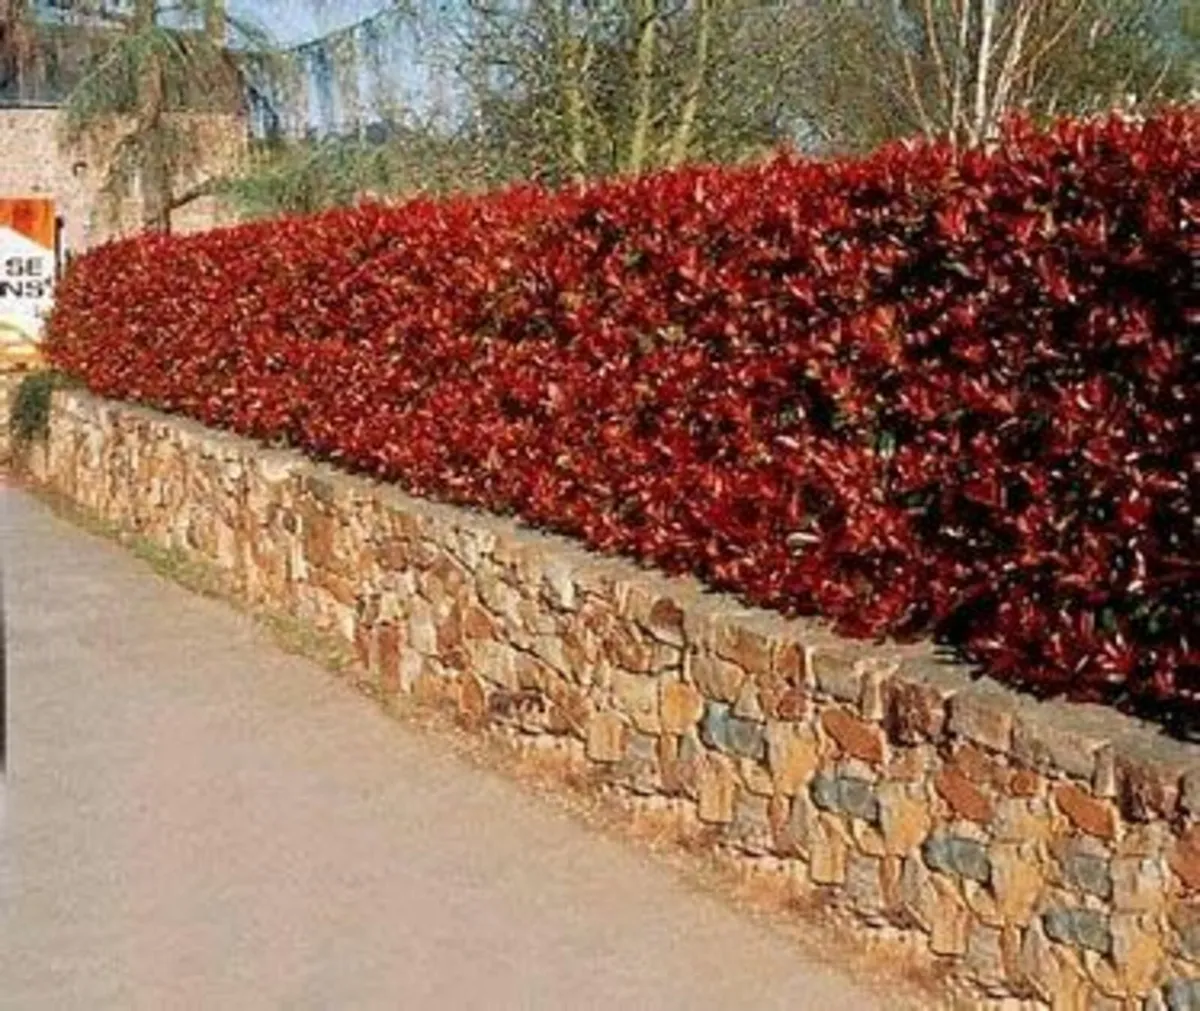 Quality Red Robin Hedging 3ft+  just 6 euro